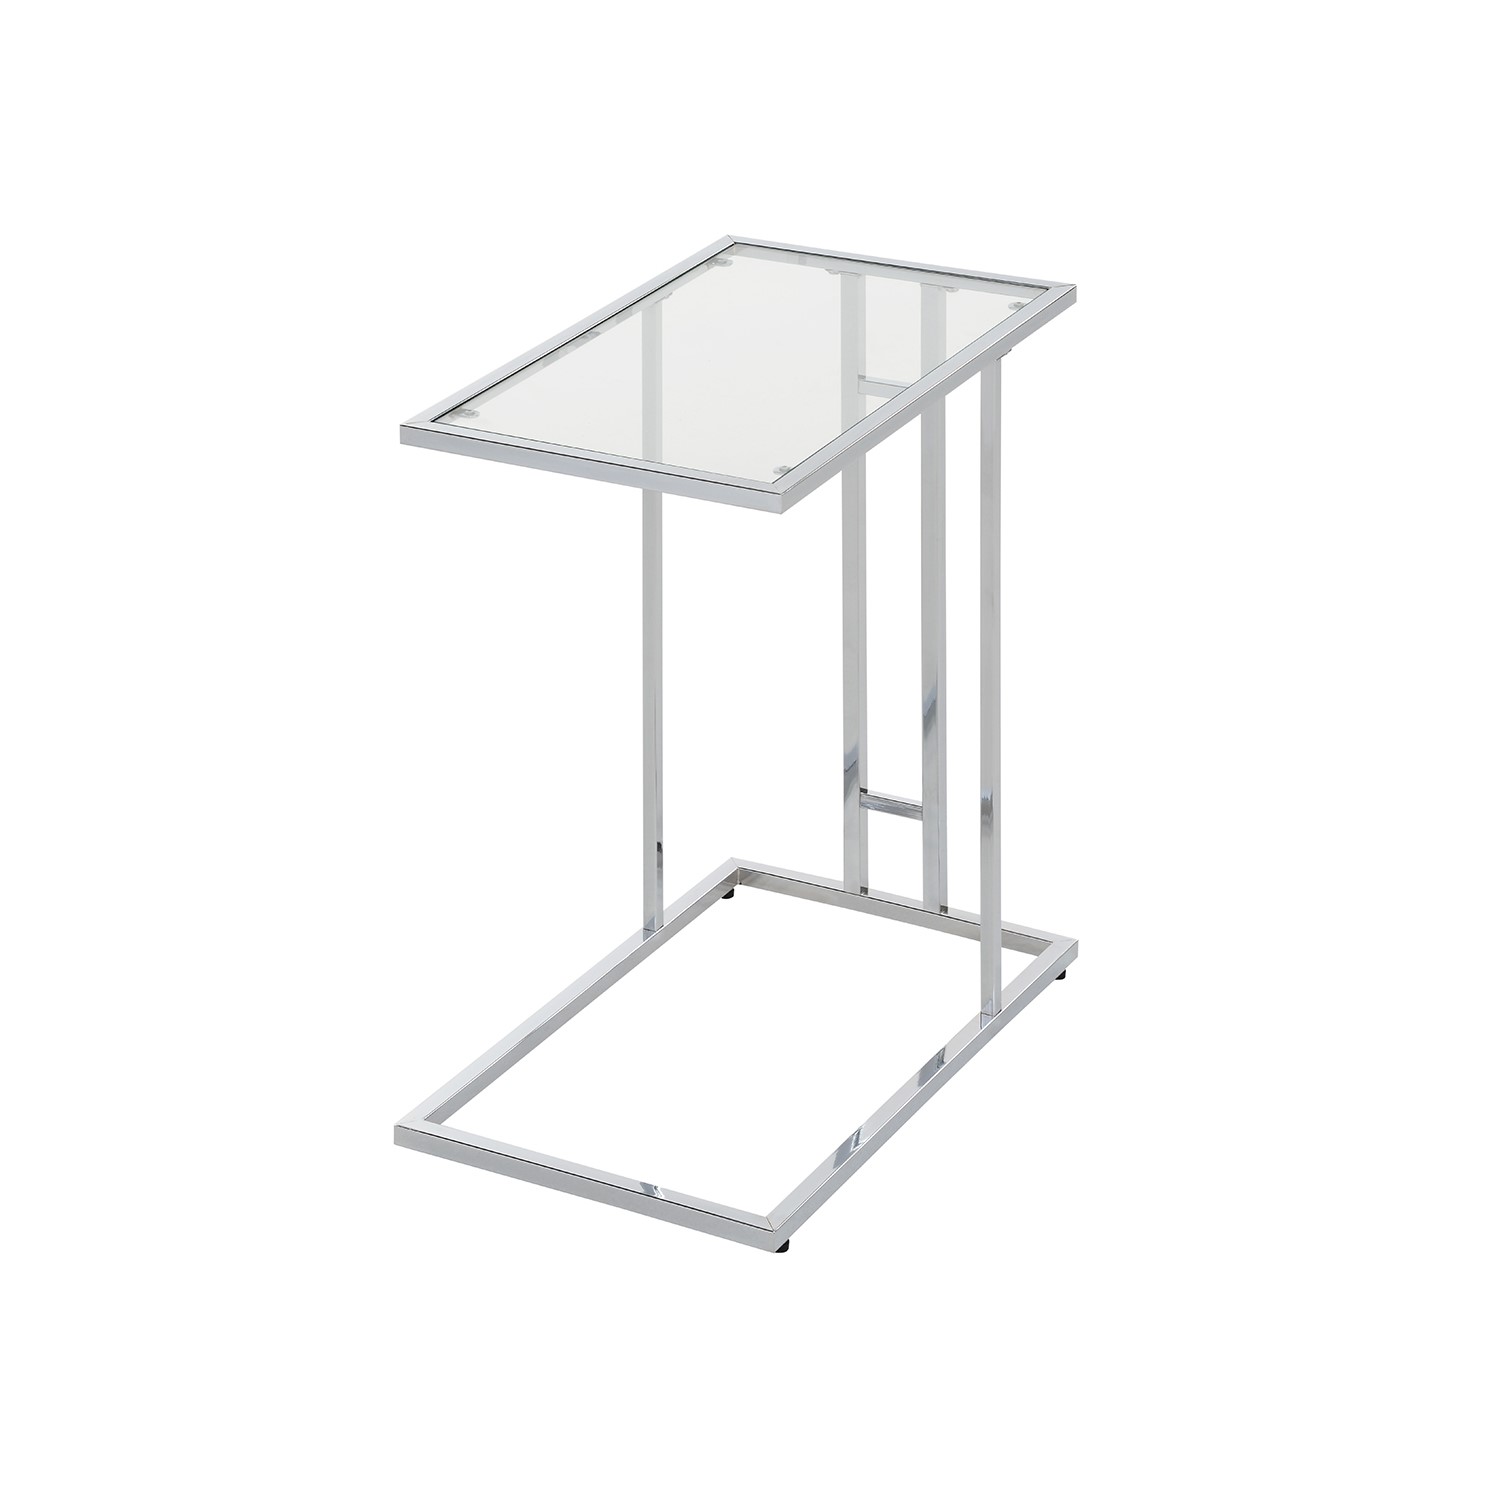 Photo of Harry stainless steel sofa table clear